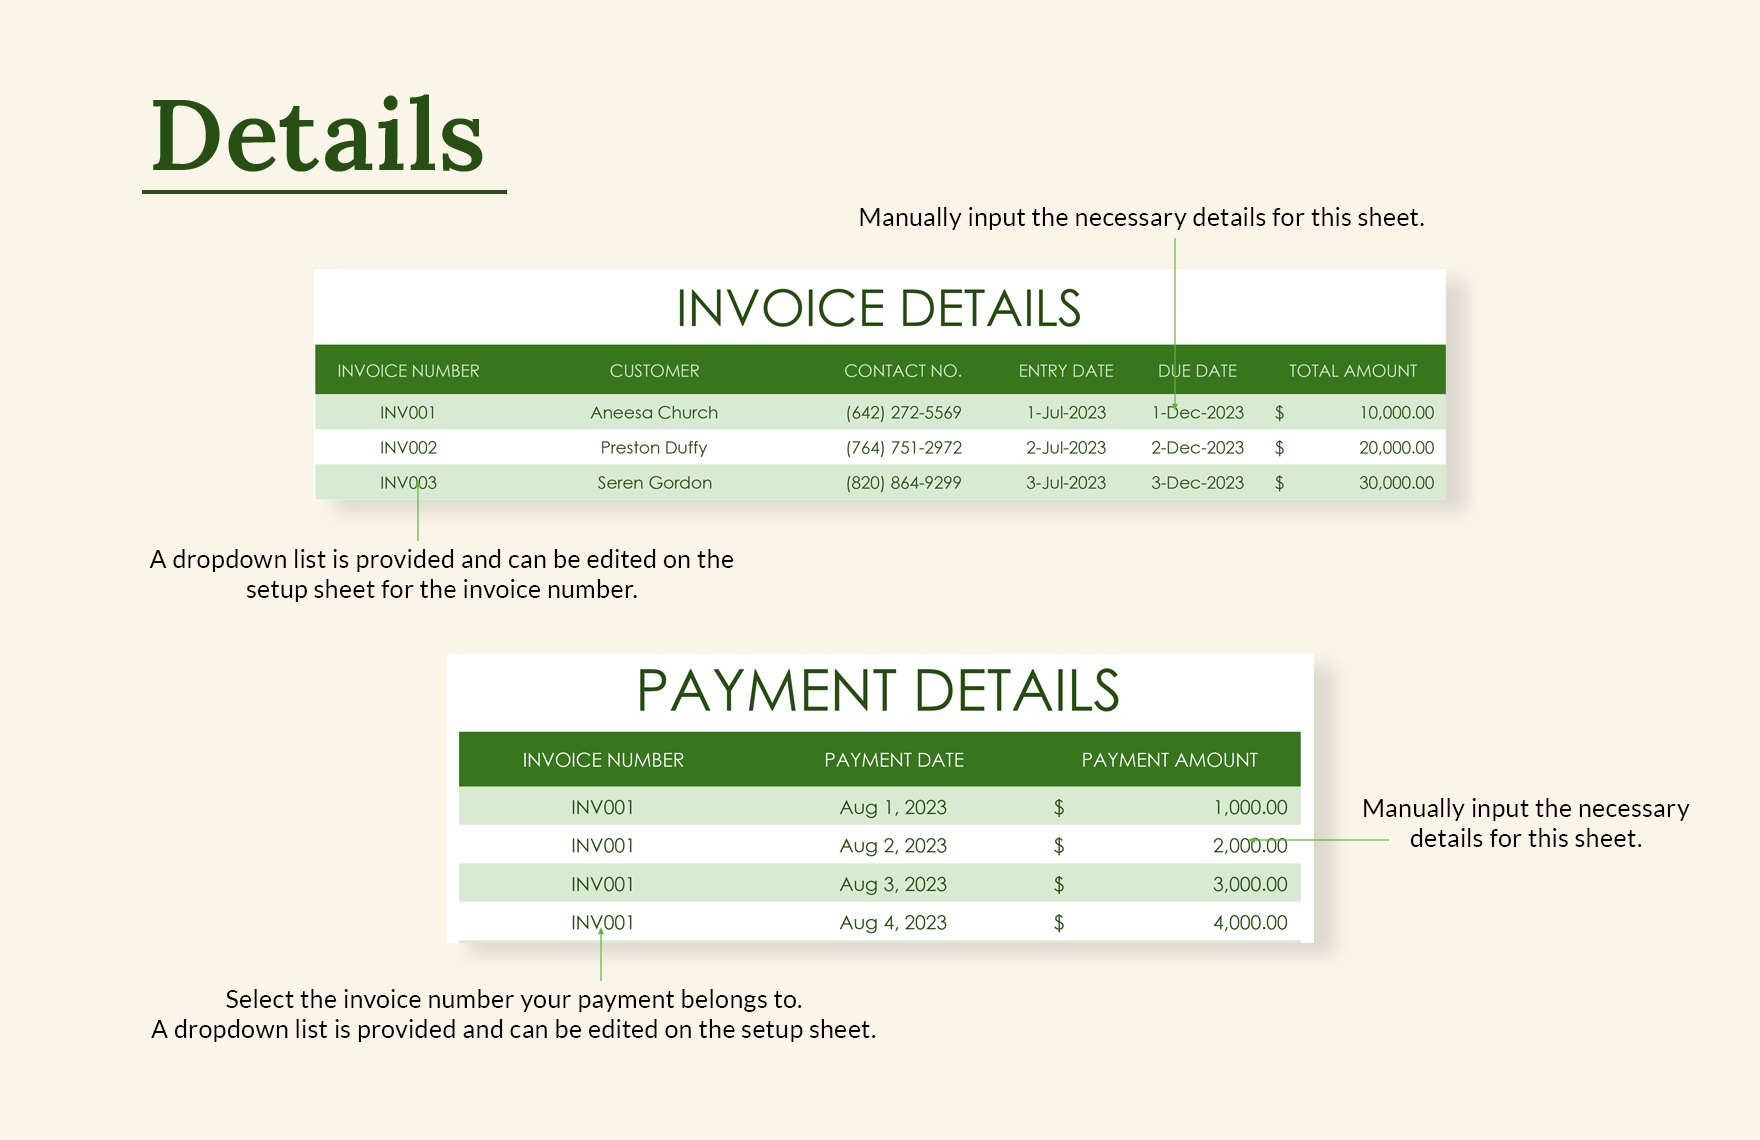 IT Accounts Receivable Analysis Sheet Template